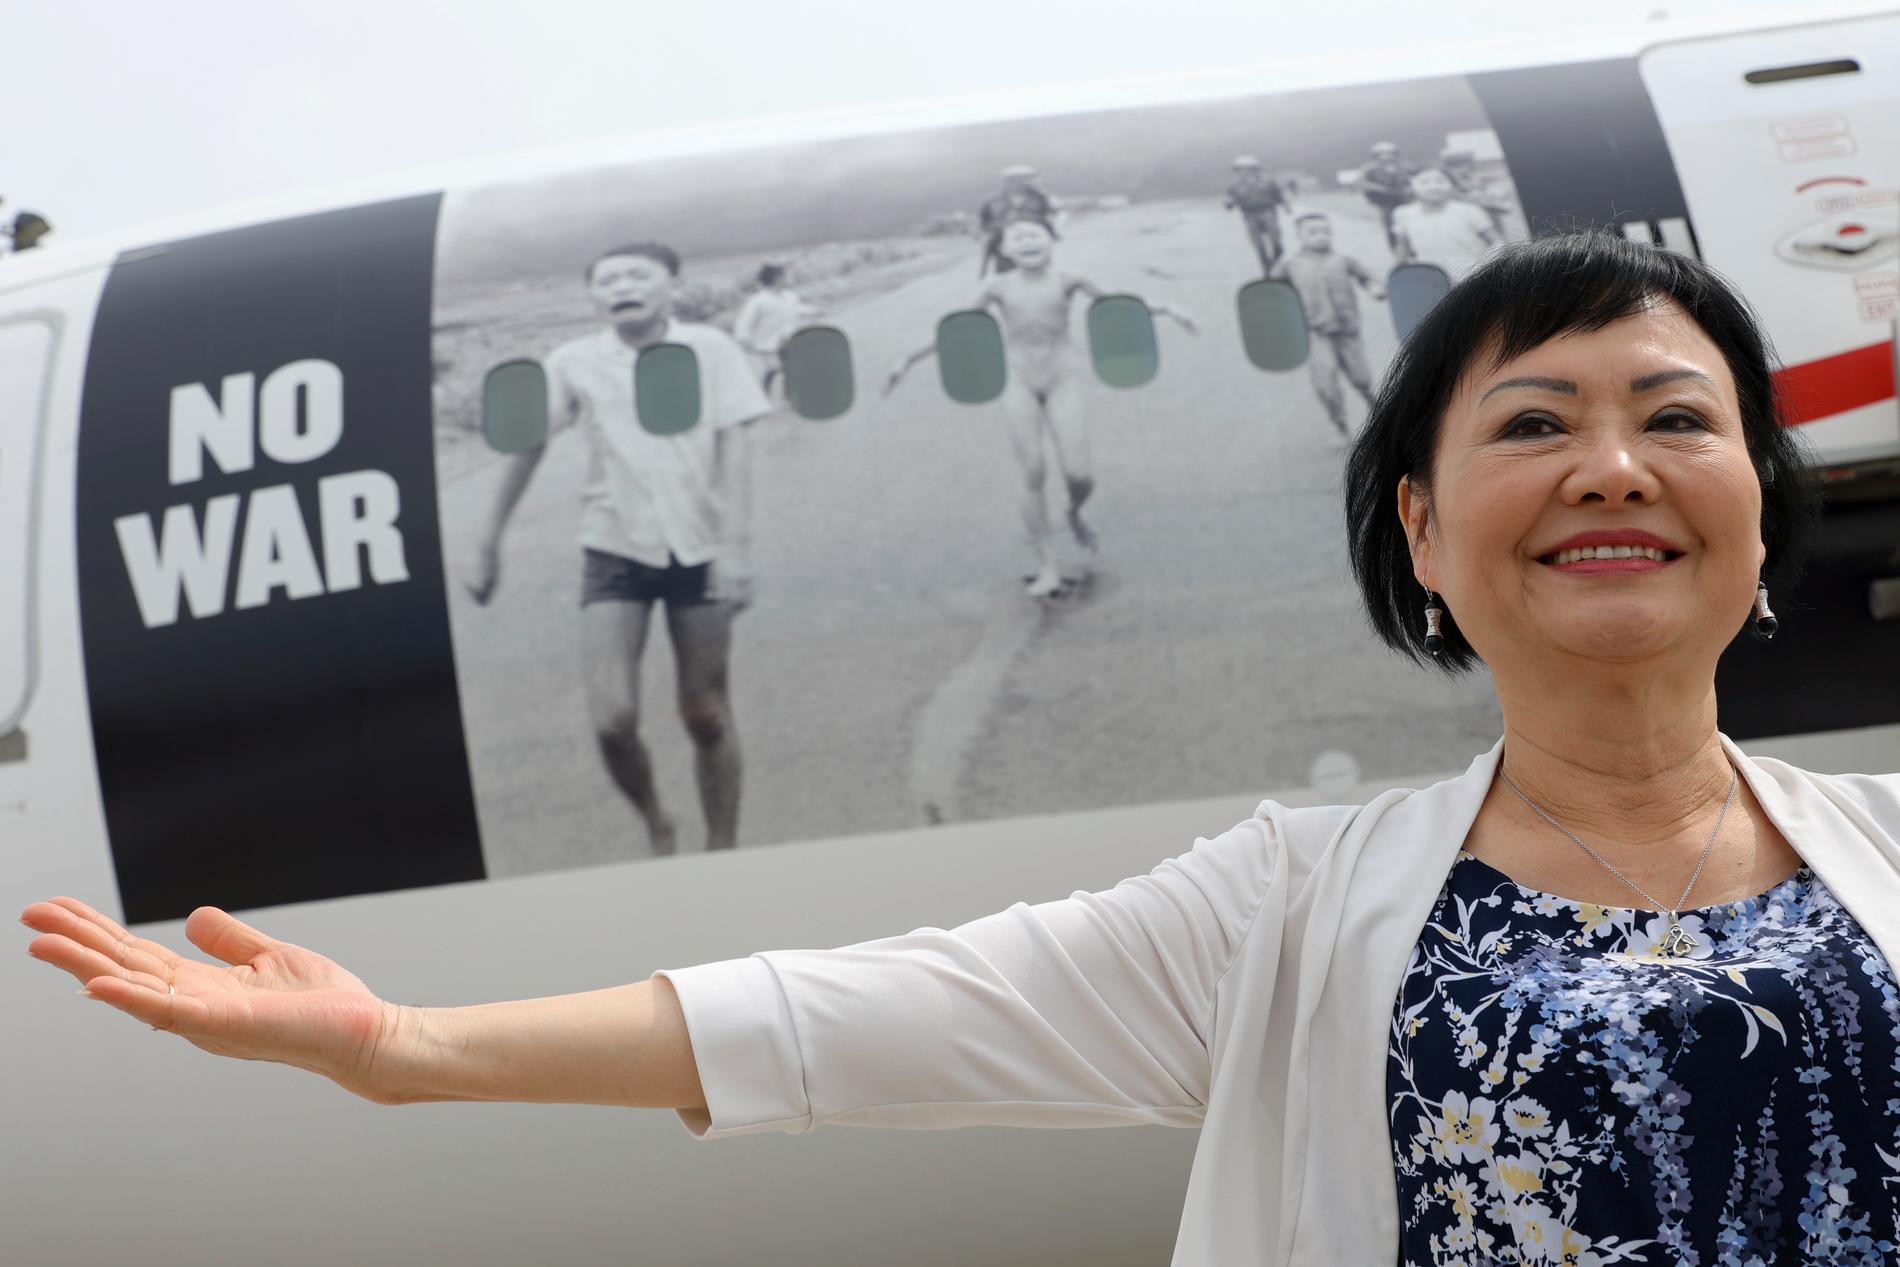 The “Napalm Girl” helped 236 Ukrainian refugees in Canada